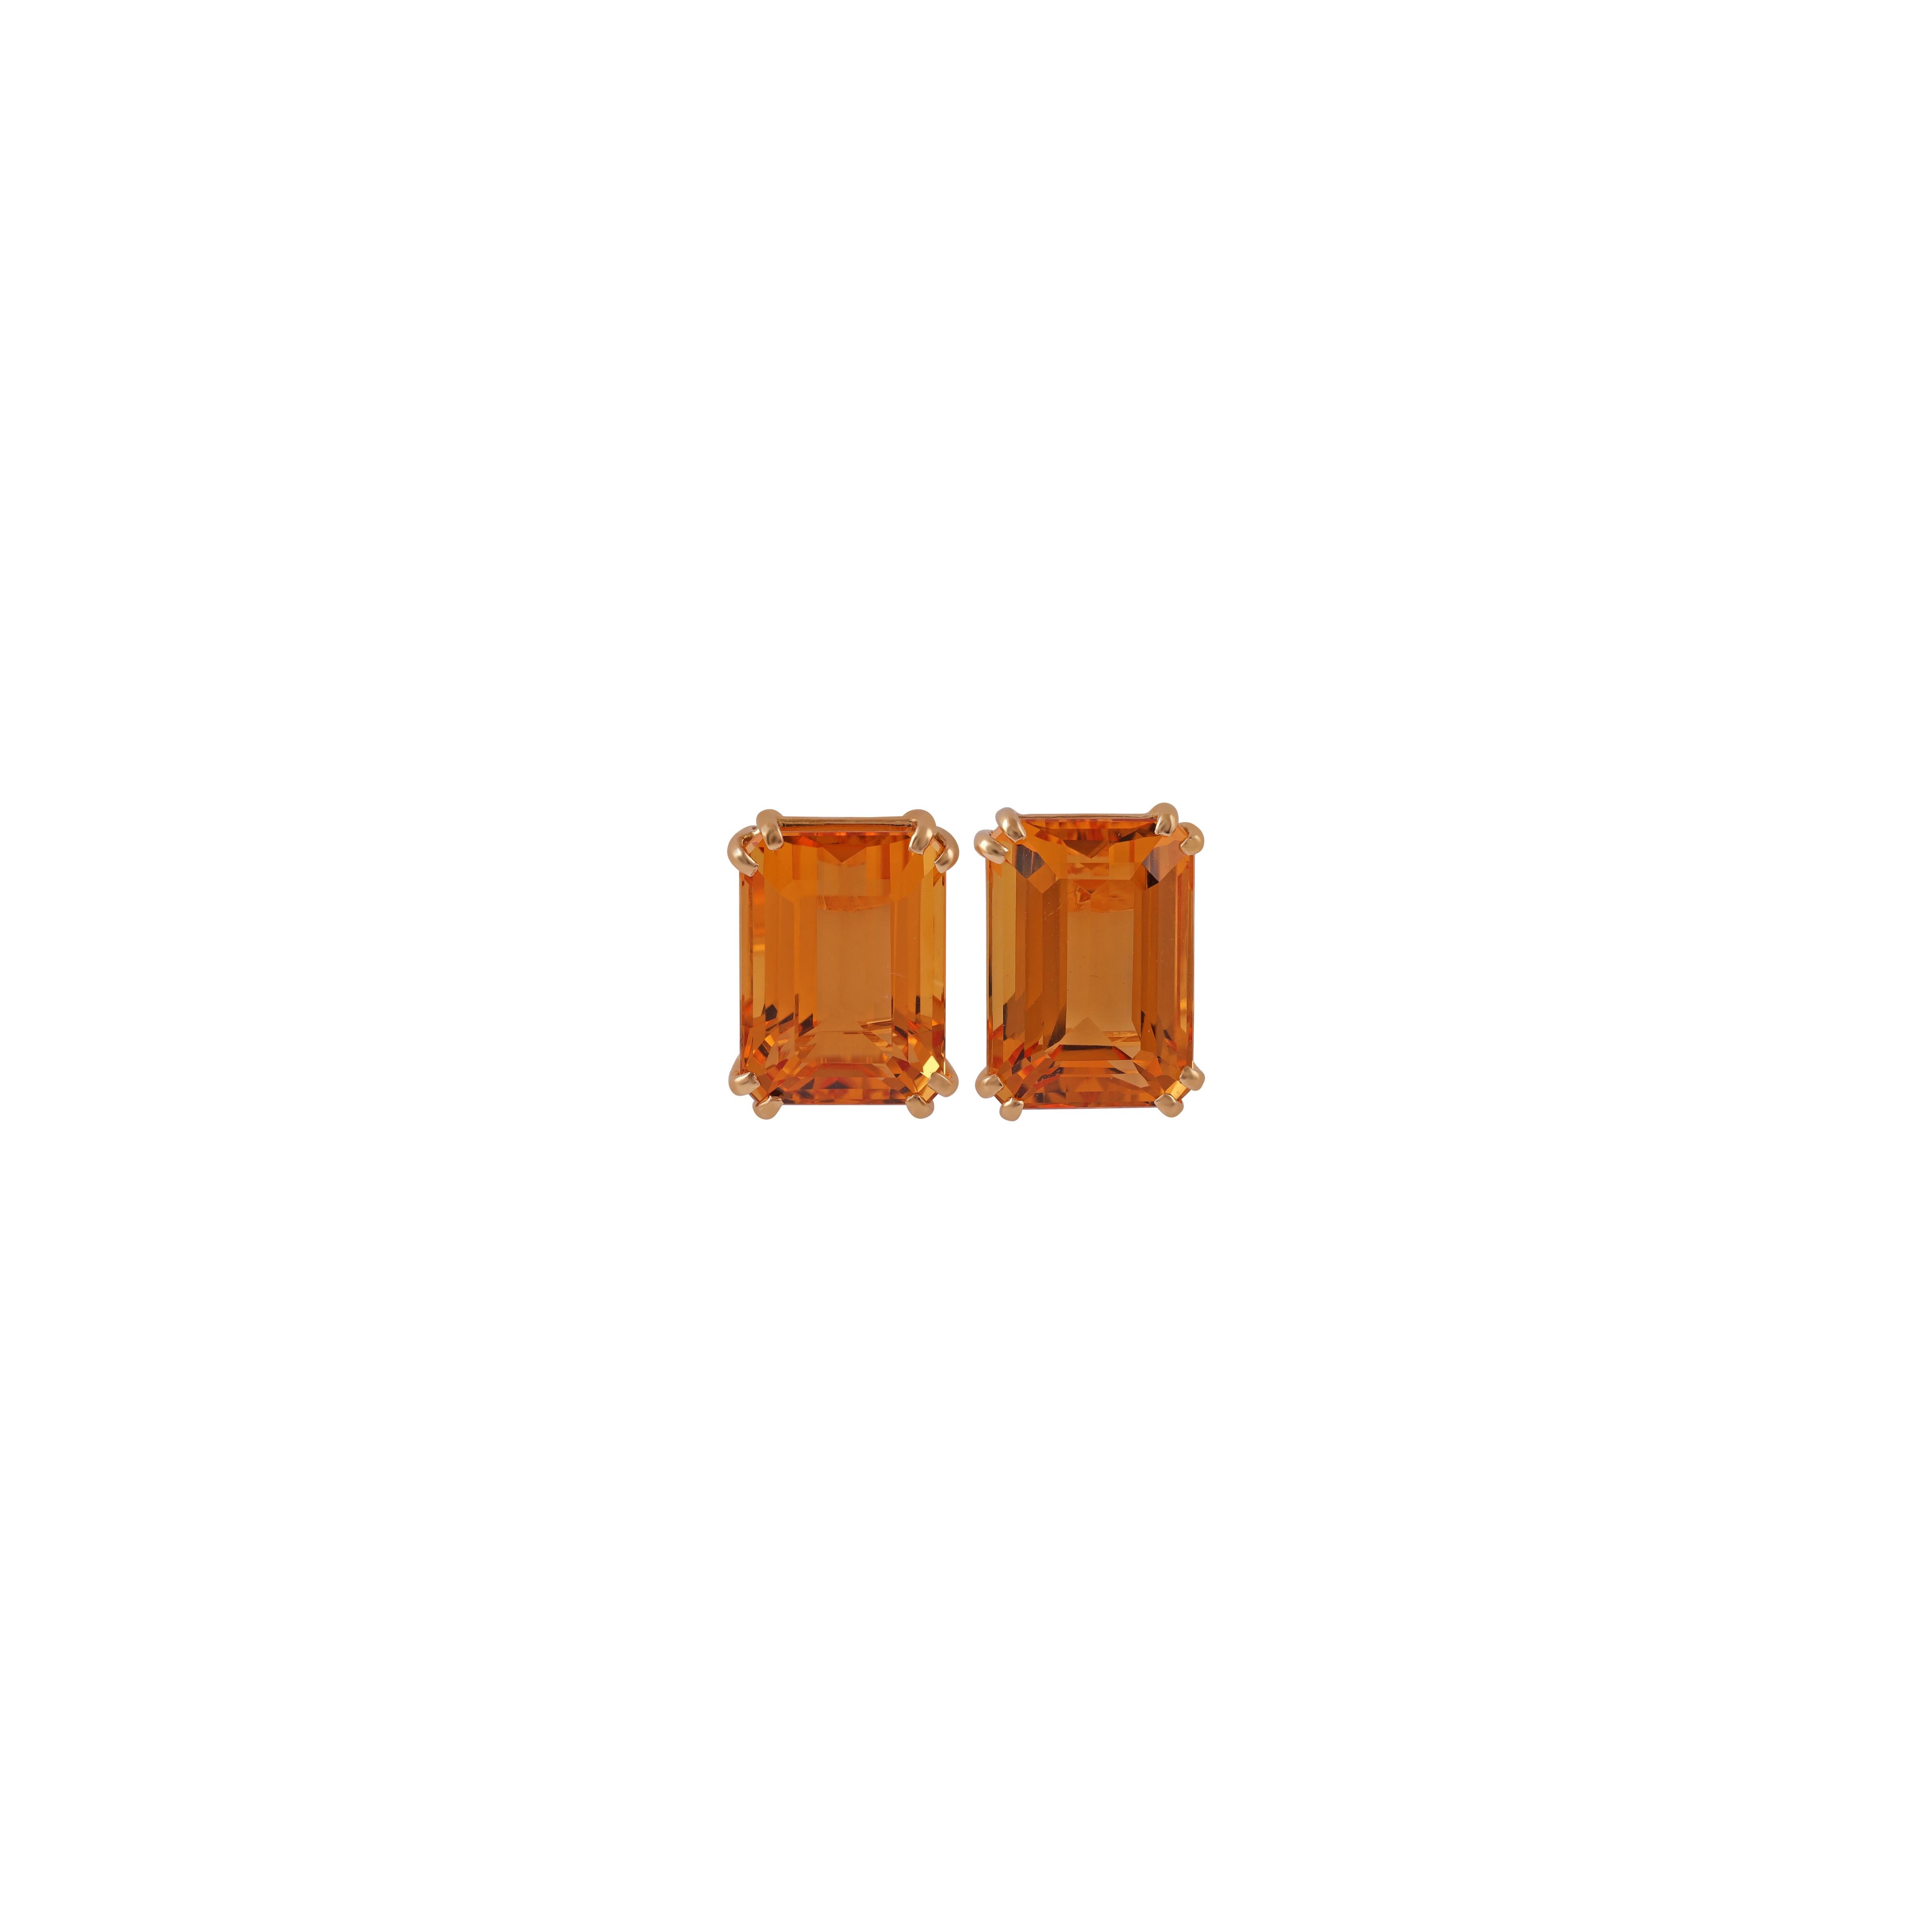 Classic and simple chic stud earrings, totally handmade in 18 kt gold setting with 4 prongs a nice and clean Citrine.
Gold - 3.39gm
Citrine - 14.94 Carat
